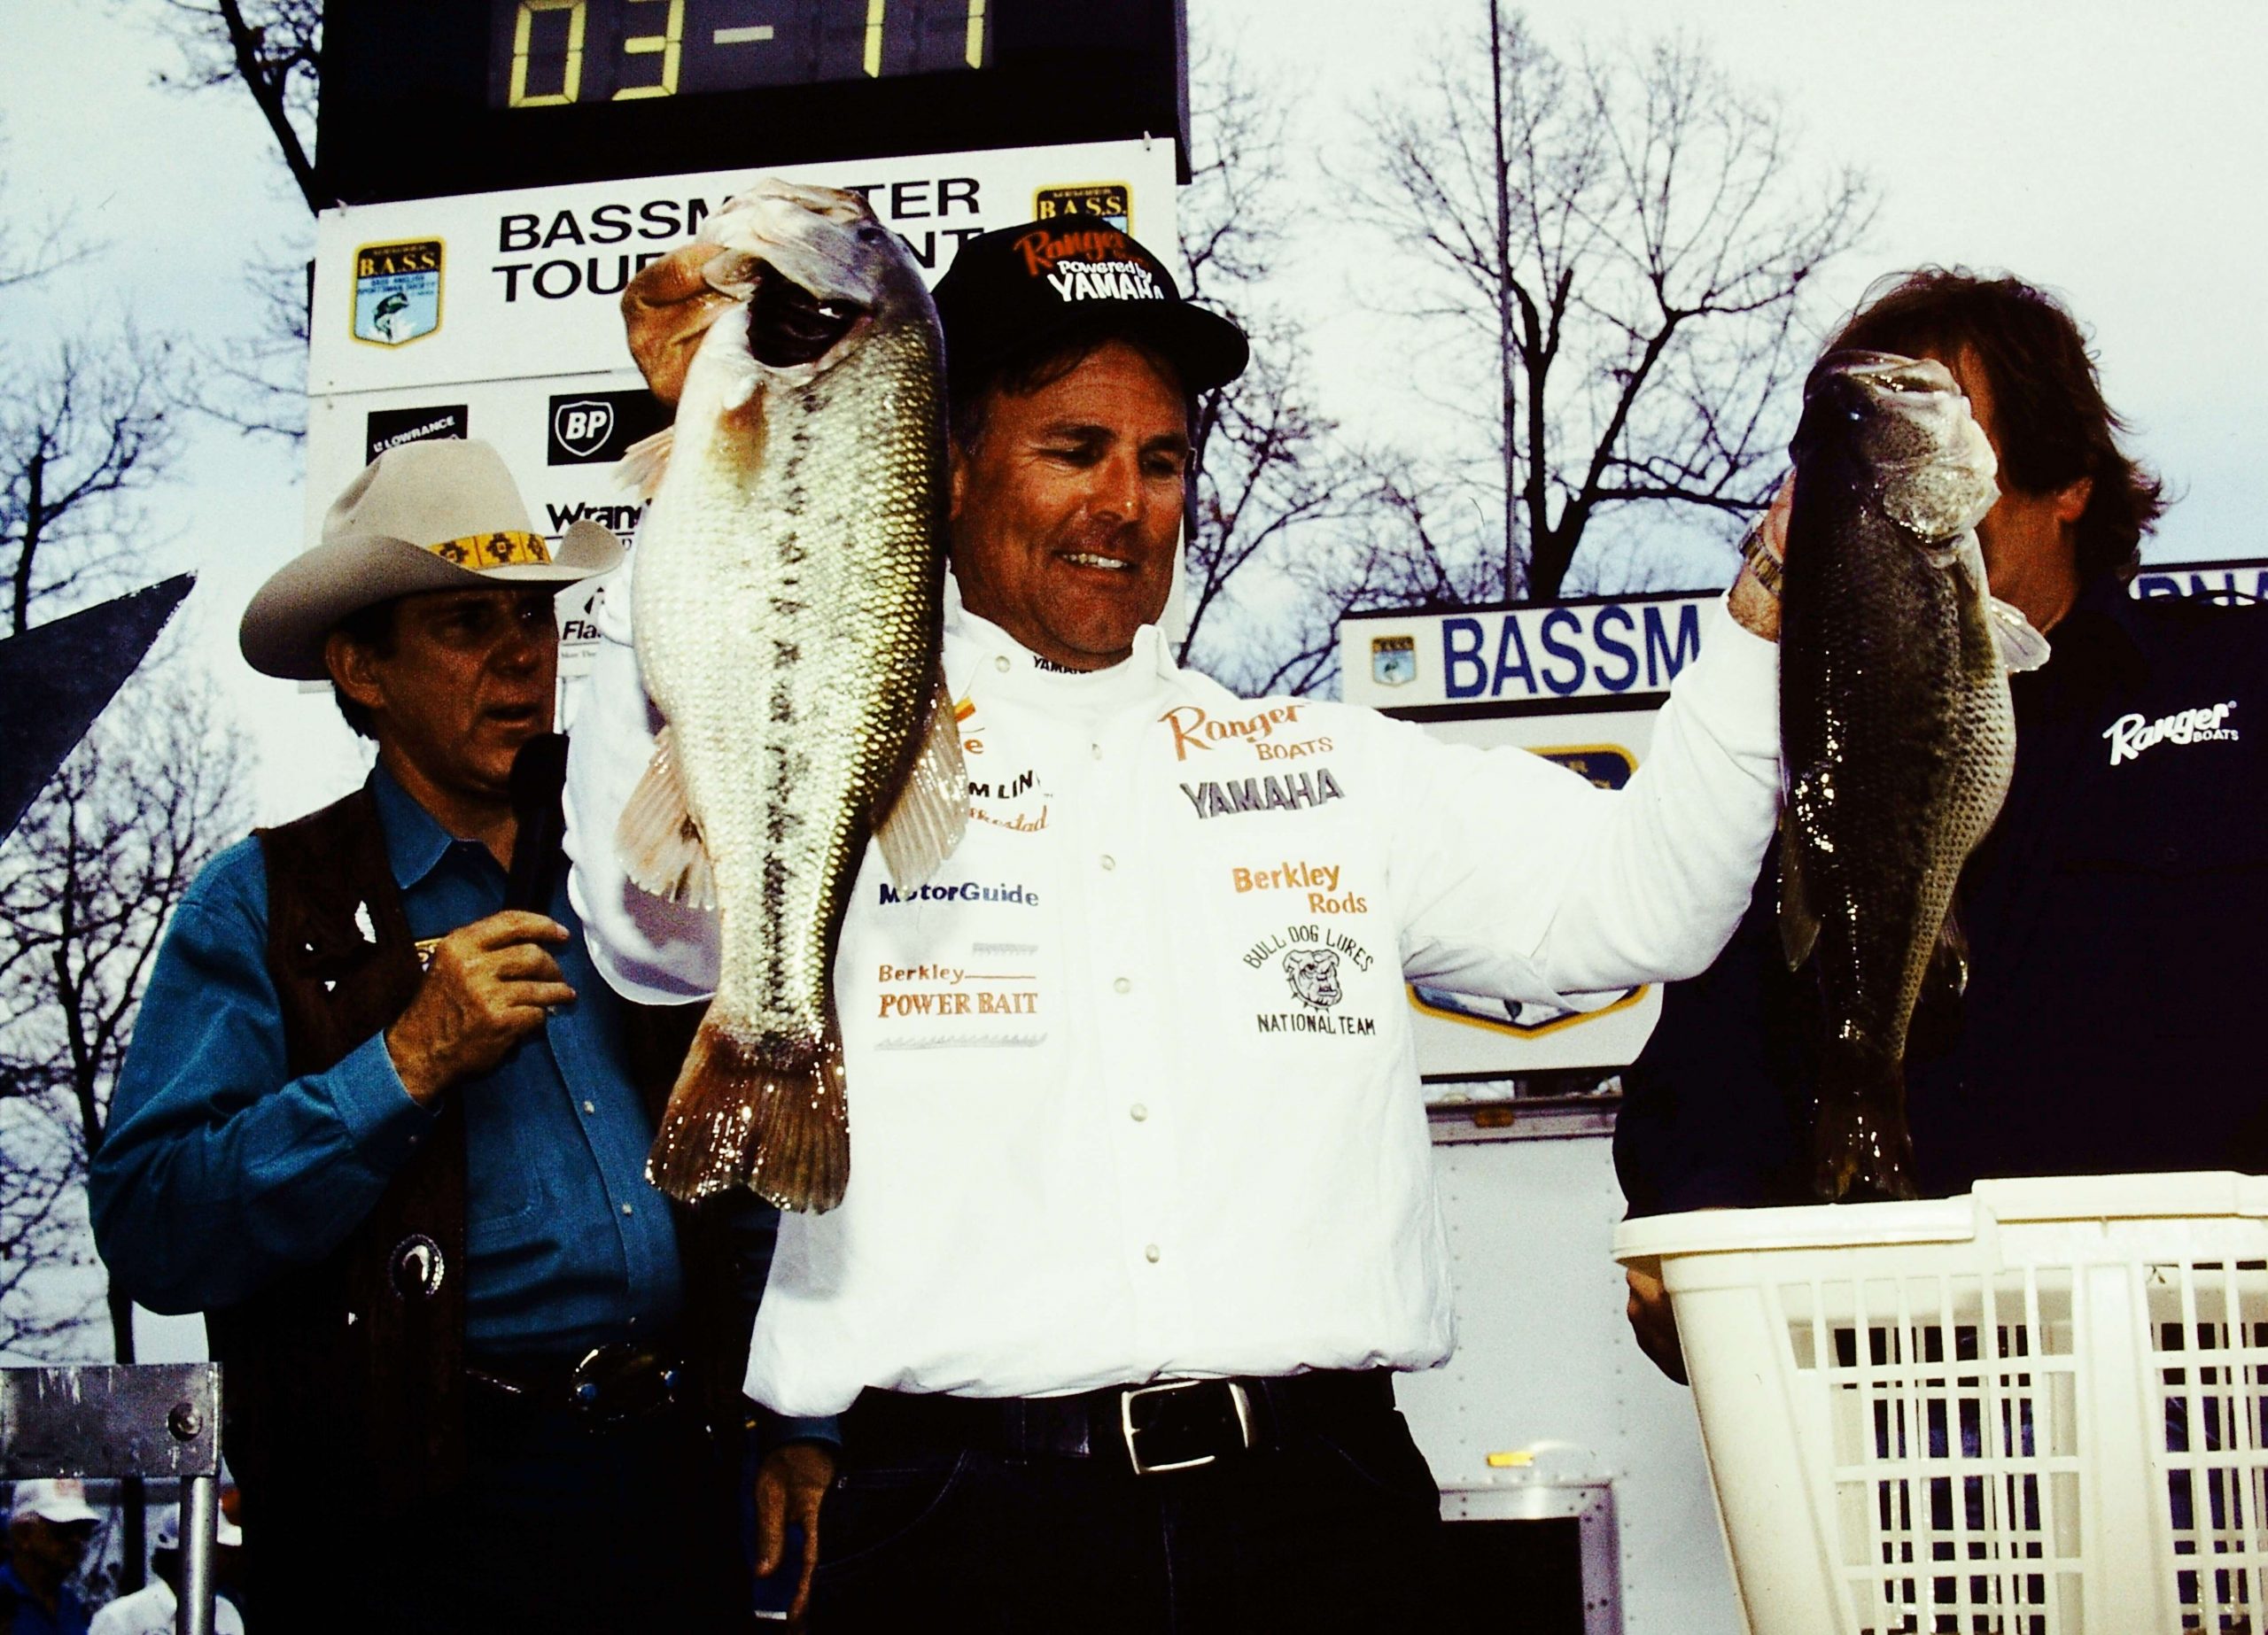 Mike Folkestad landed just outside the Top 5 with a total of 37 pounds, 10 ounces. He was behind Klein by just 2 ounces.